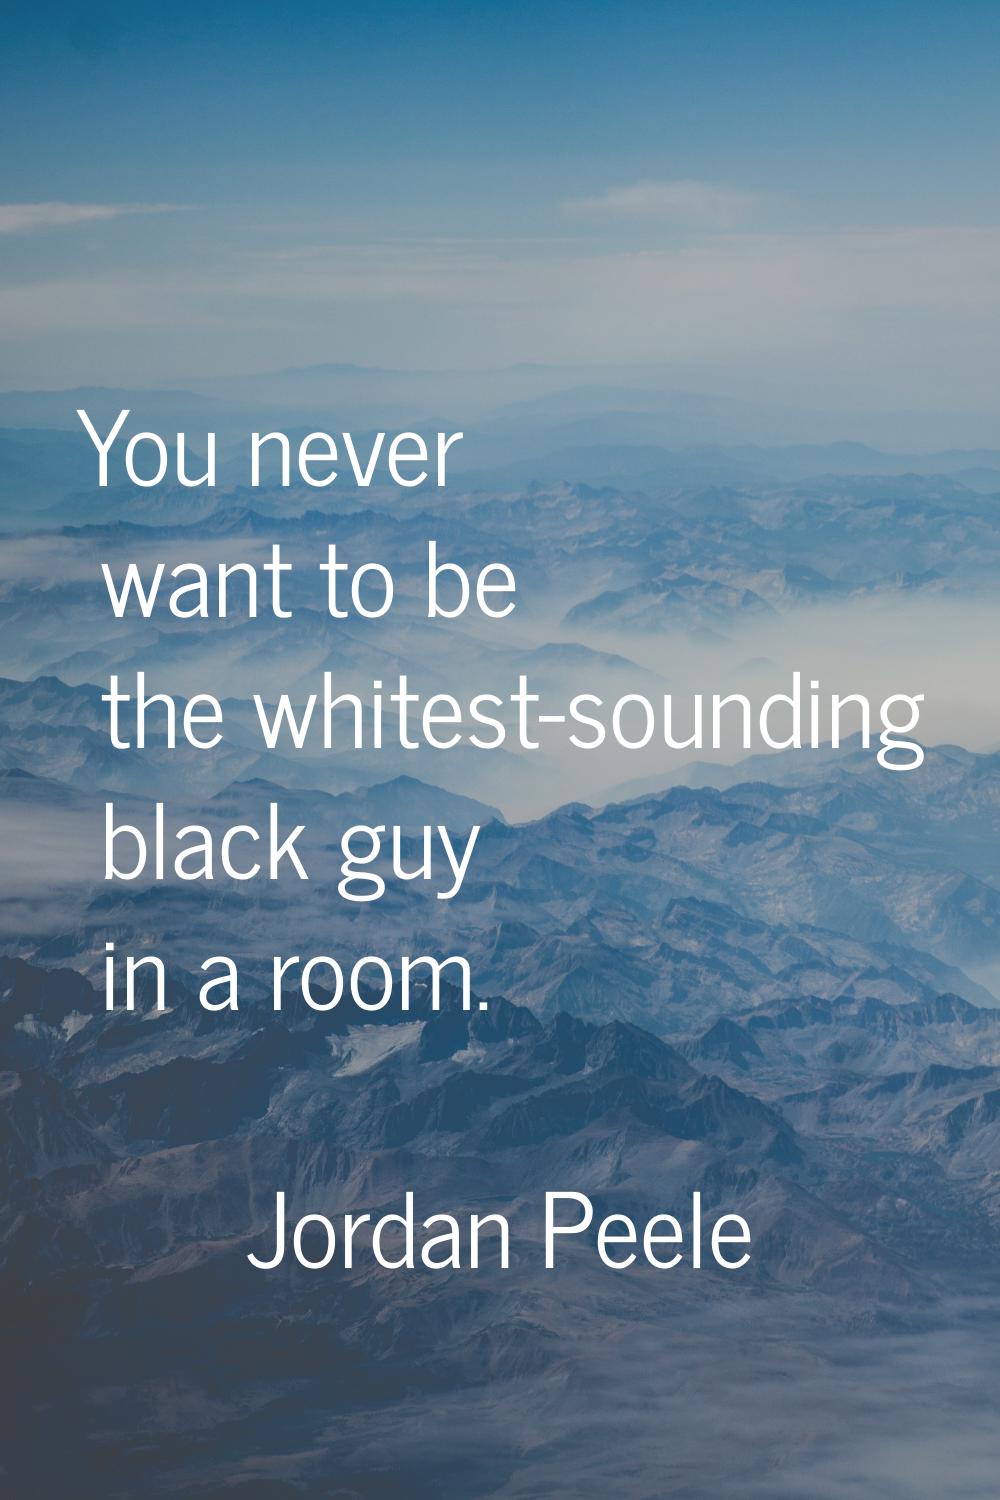 You never want to be the whitest-sounding black guy in a room.